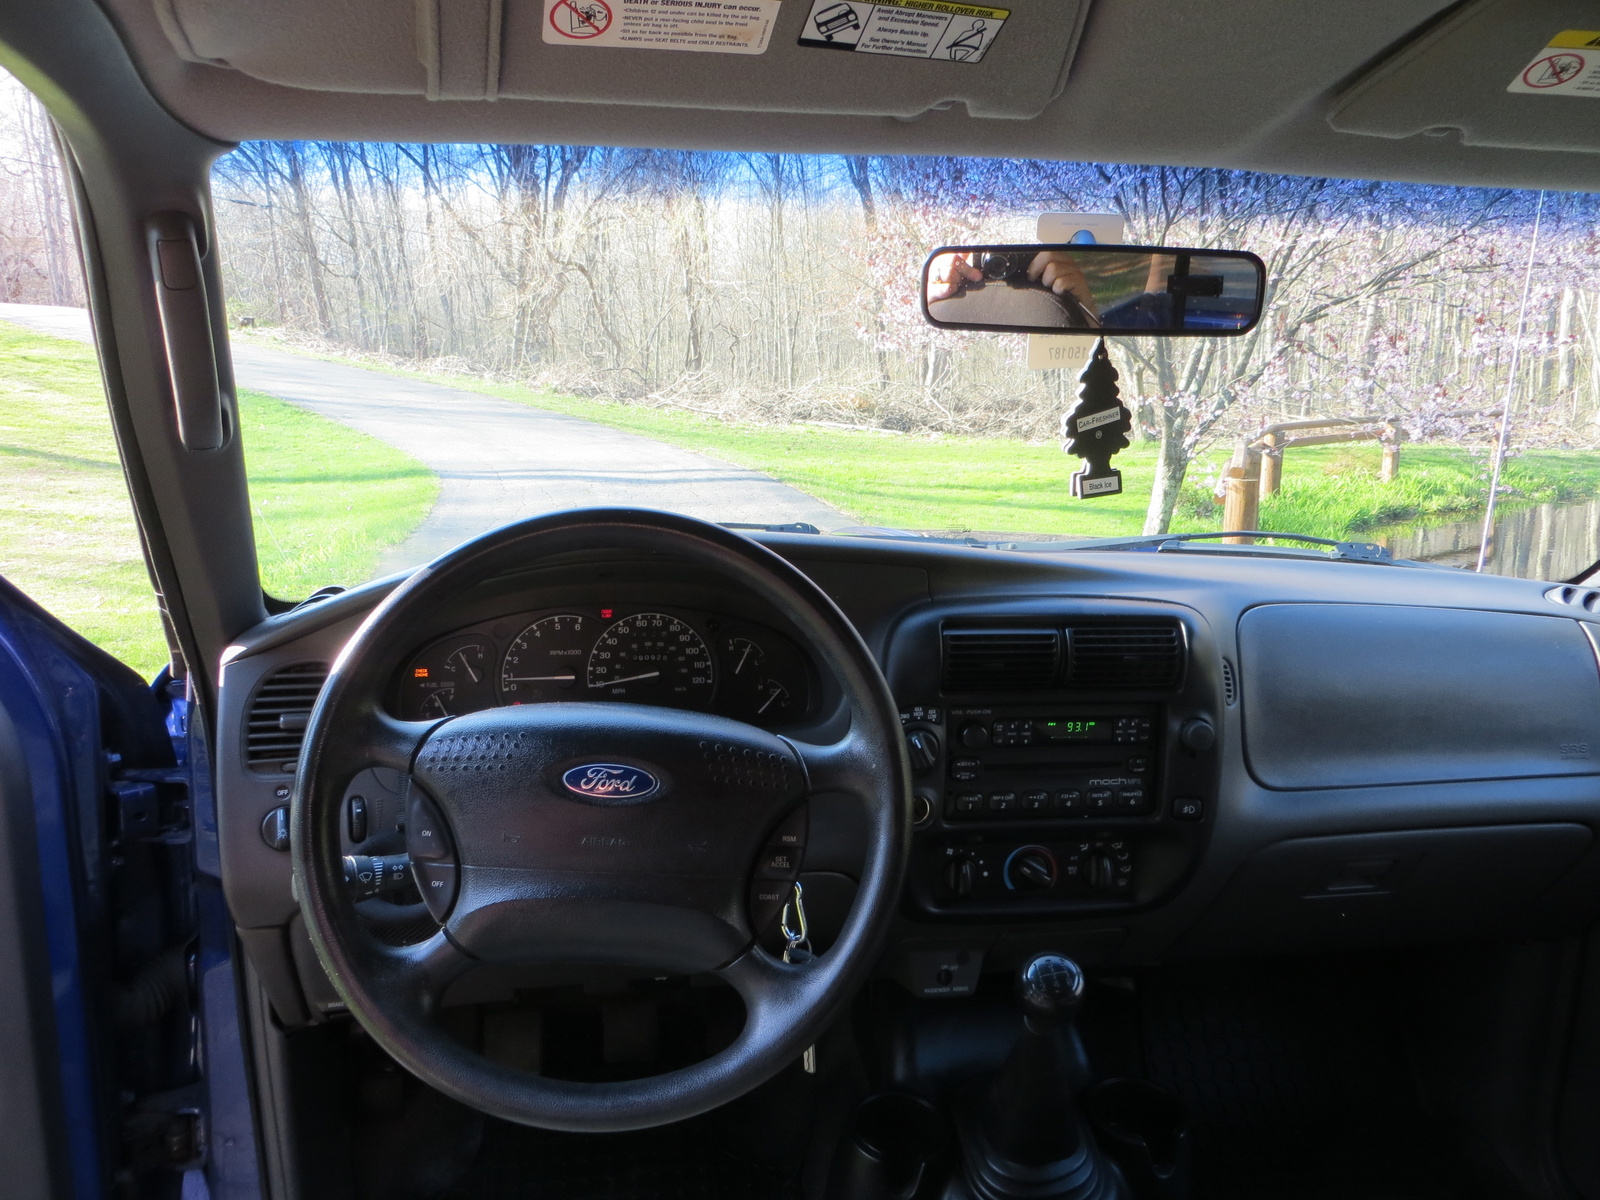 2003 Ford ranger interior pictures